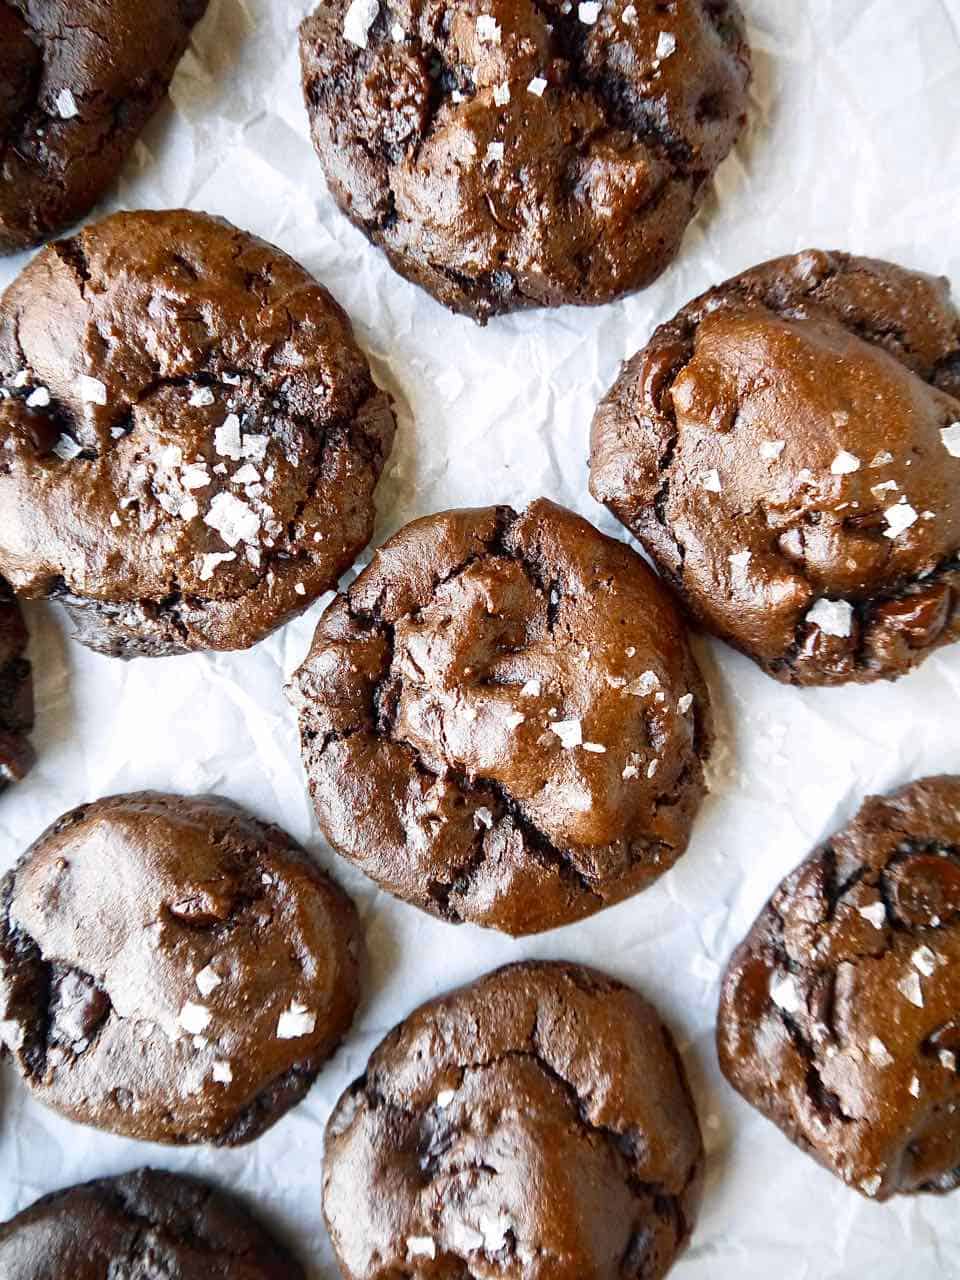 Freshly baked paleo chocolate cookies on parchment paper.